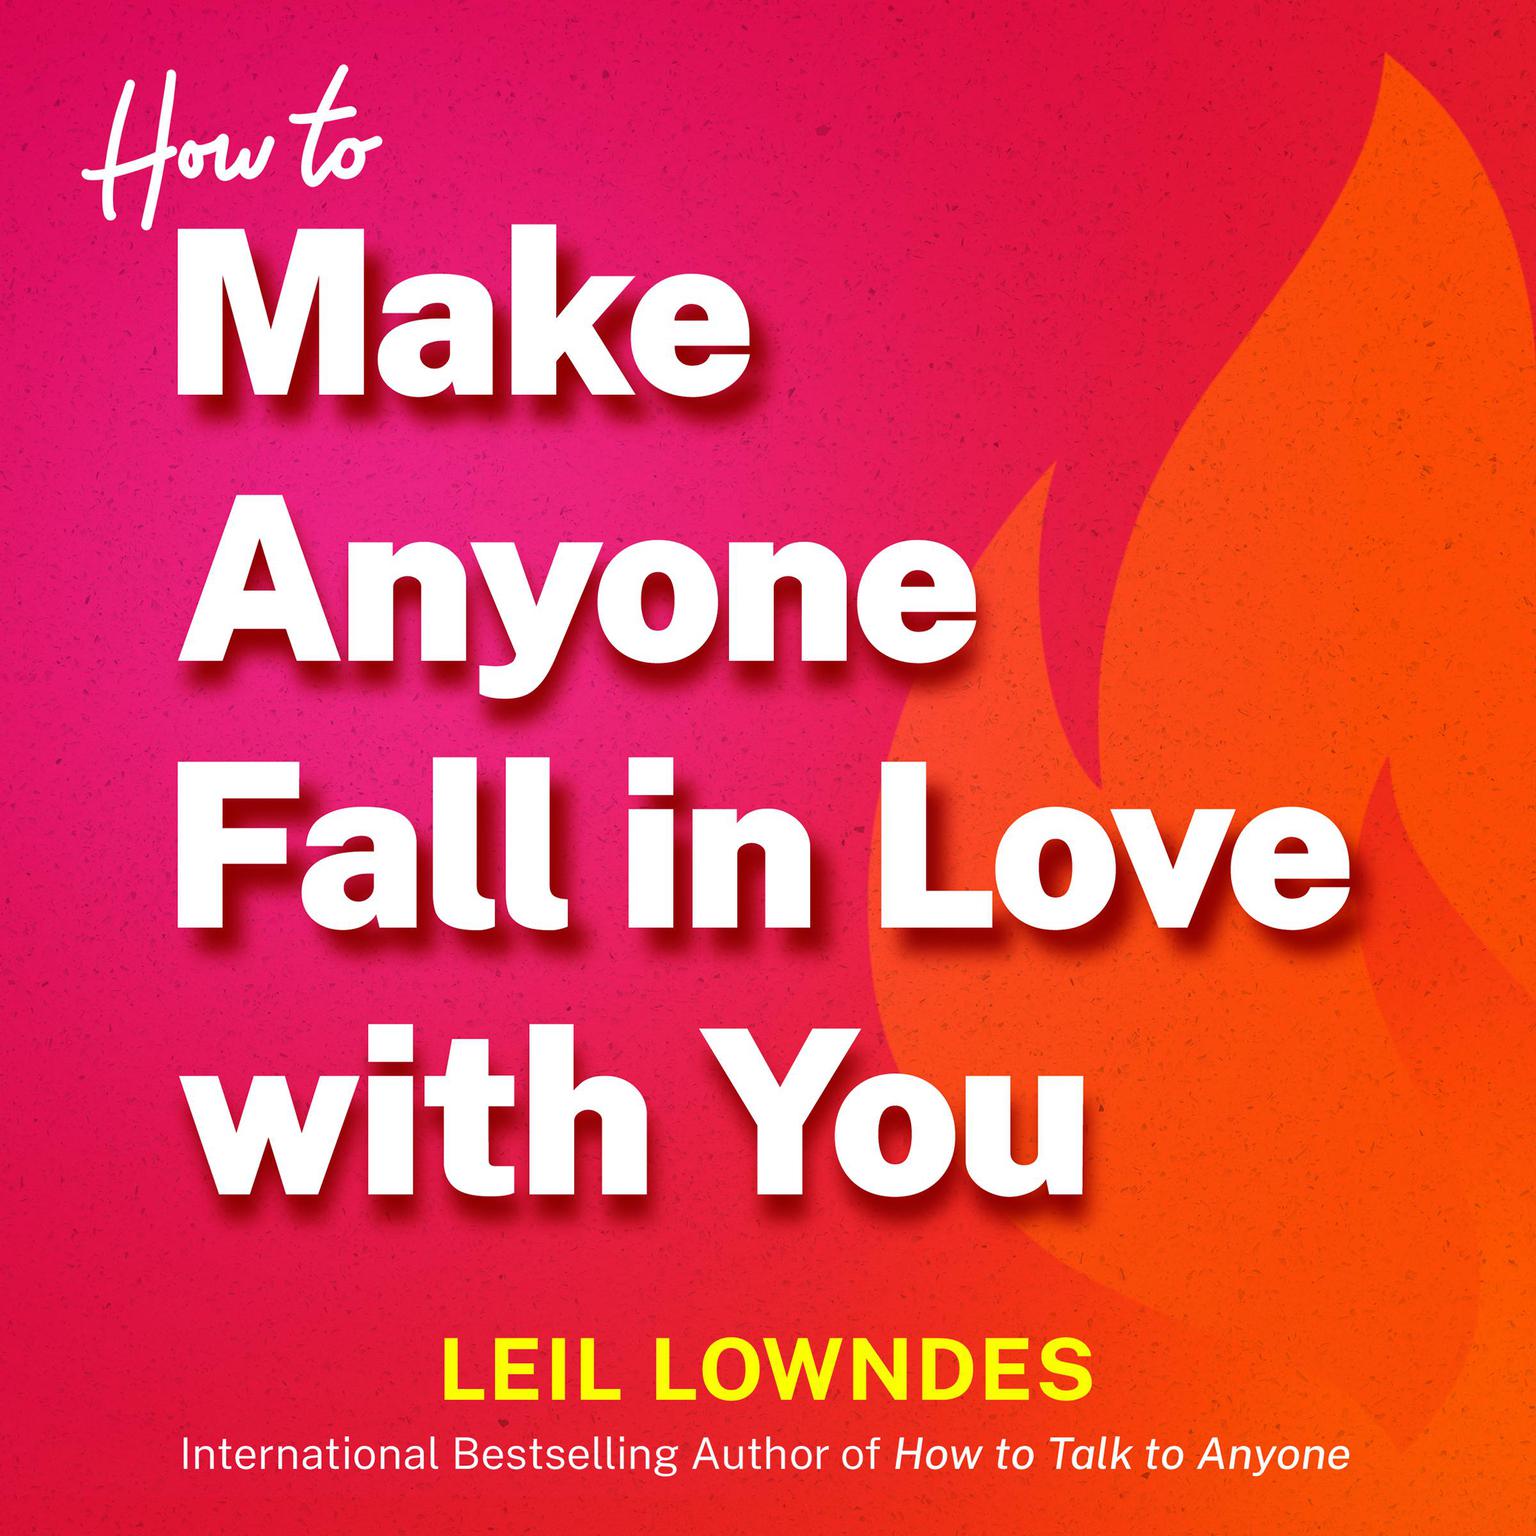 How to Make Anyone Fall in Love with You Audiobook, by Leil Lowndes